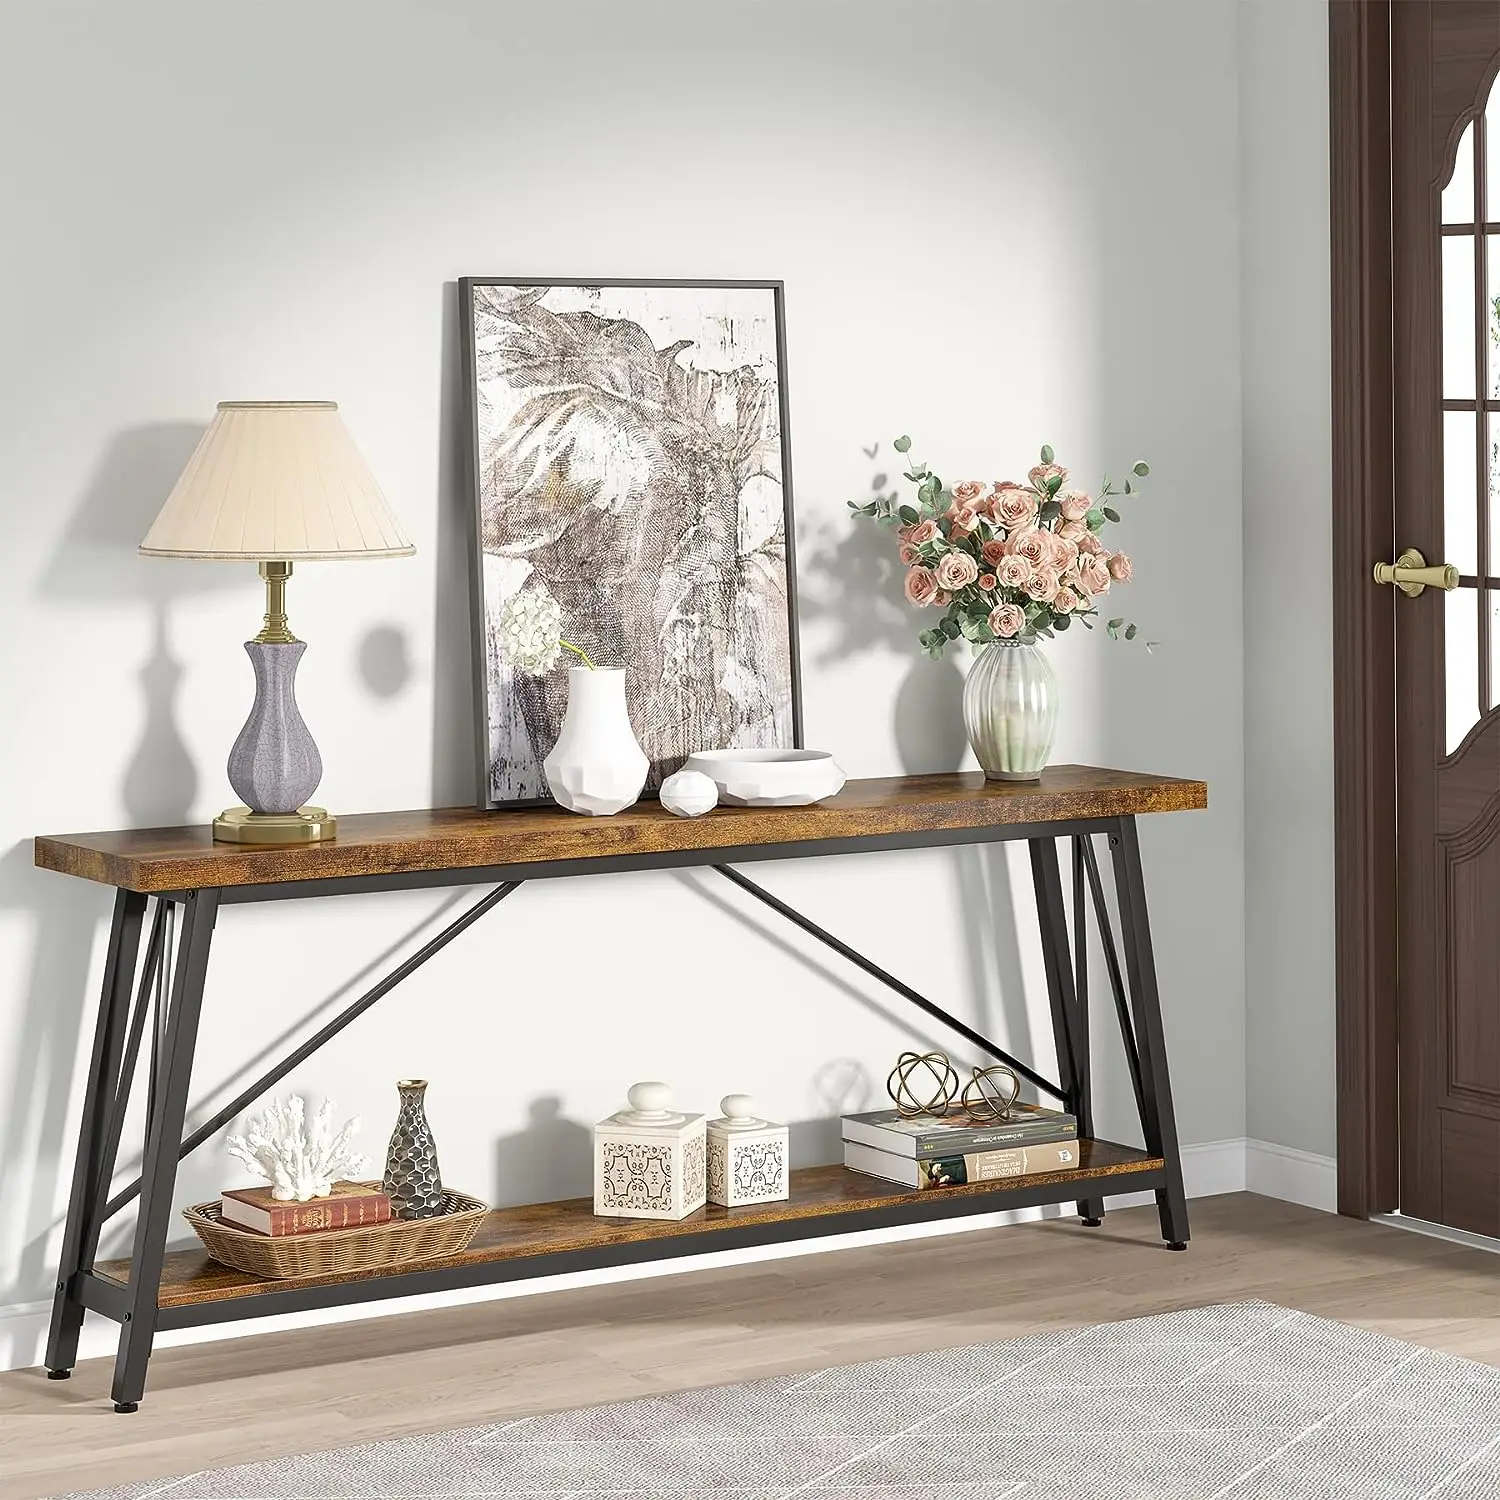 Control table Living room Country Industrial sofa table Entrance hallway Long bar table